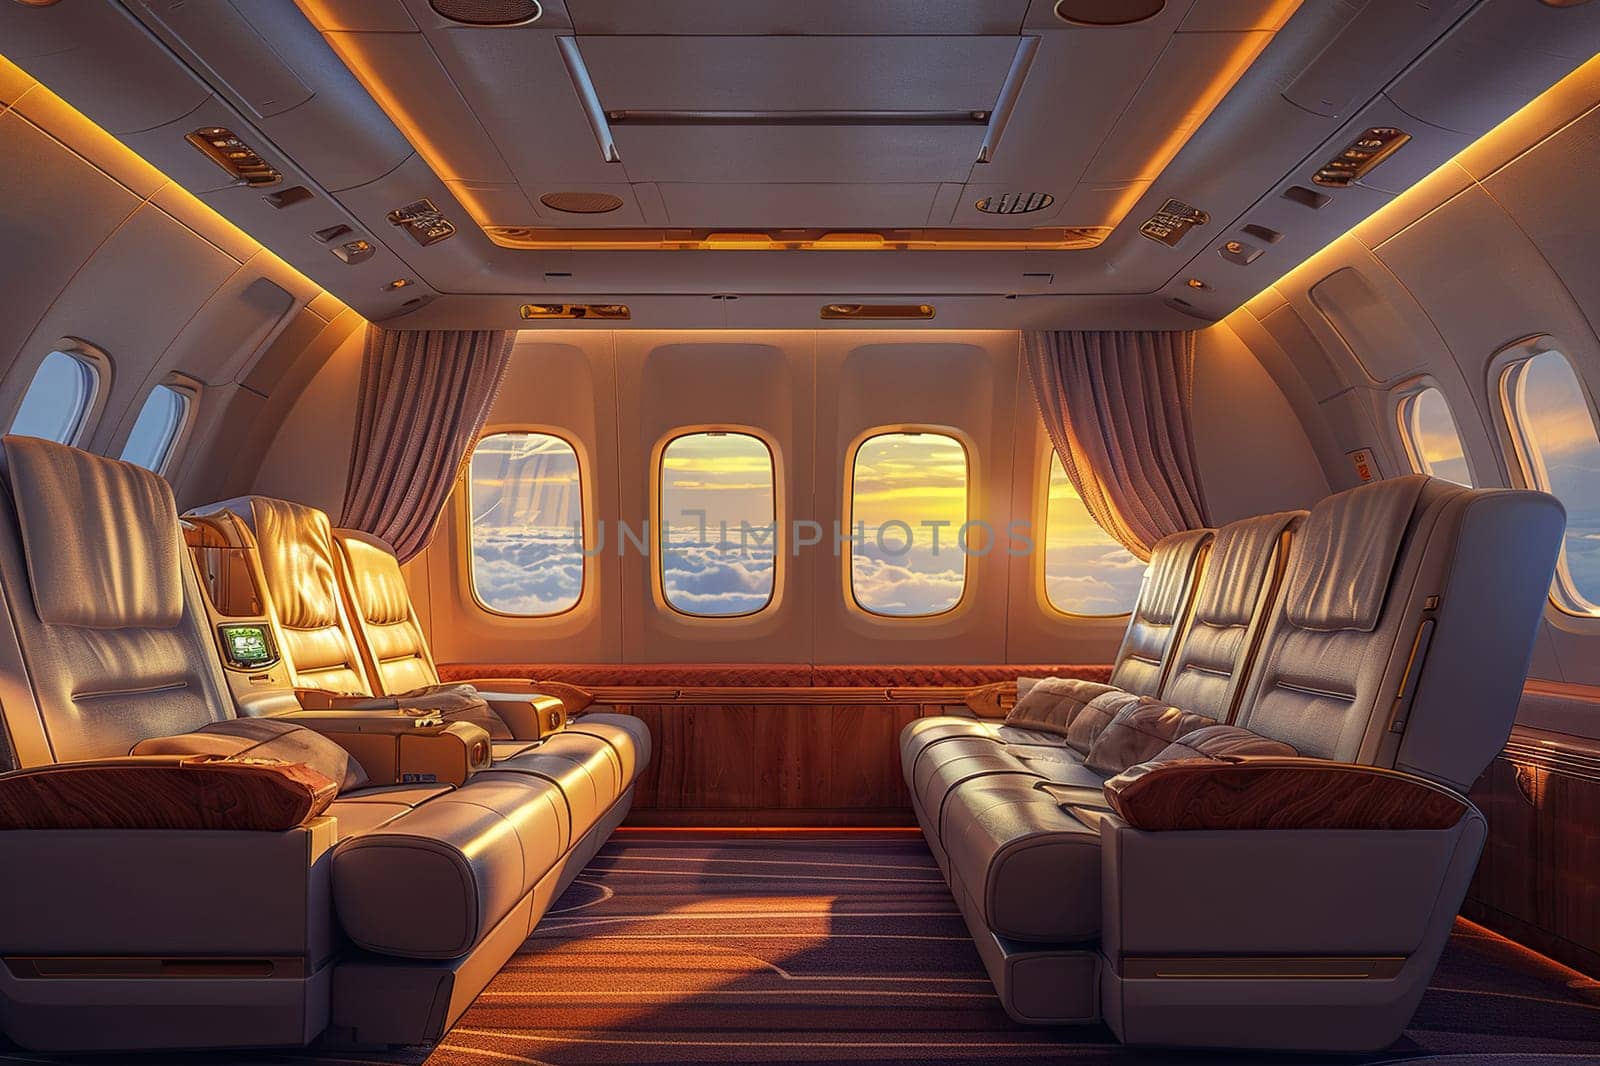 Airplane cabin interior with empty comfortable seats in business class with windows. Air transport.